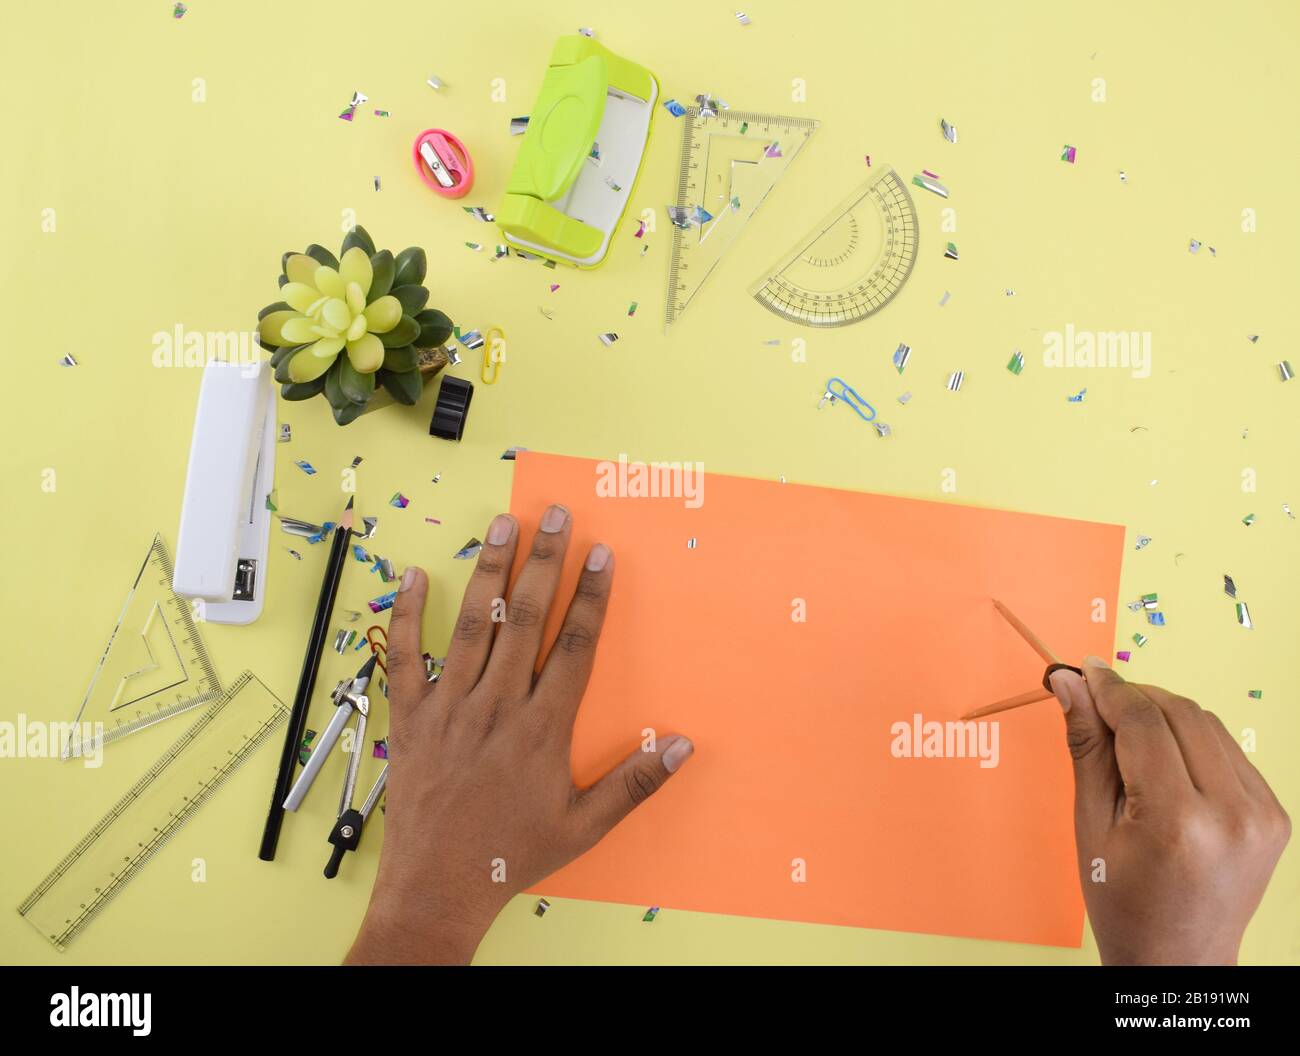 https://c8.alamy.com/comp/2B191WN/various-study-materials-scattered-on-a-yellow-paper-background-while-a-person-is-drawing-on-a-orange-paper-with-a-compass-2B191WN.jpg